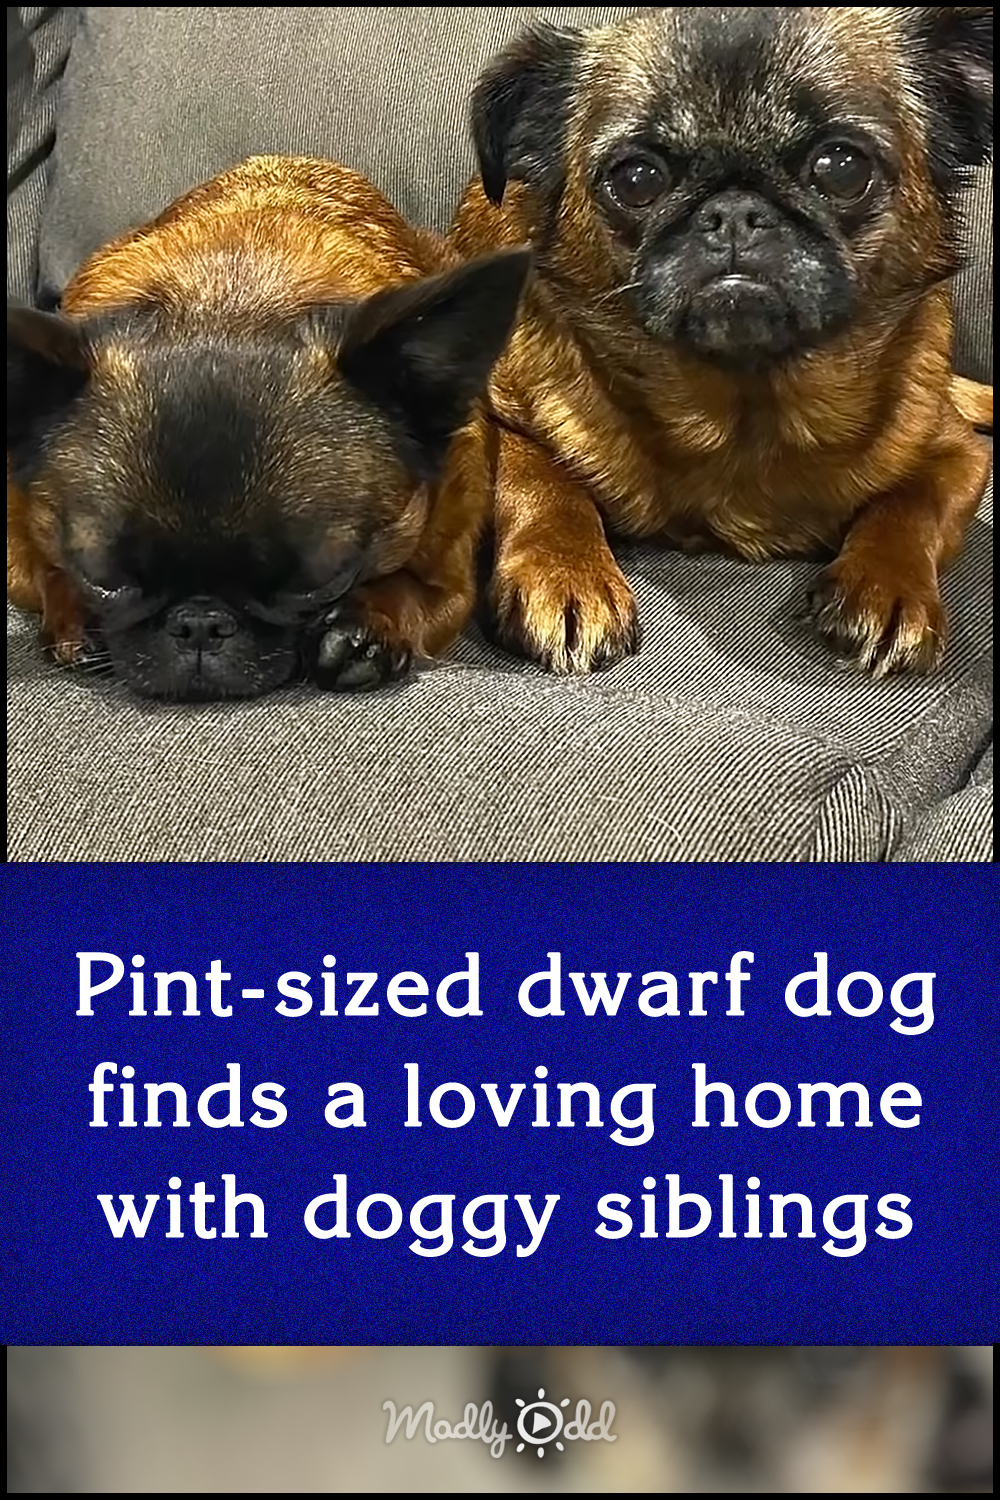 Pint-sized dwarf dog finds a loving home with doggy siblings